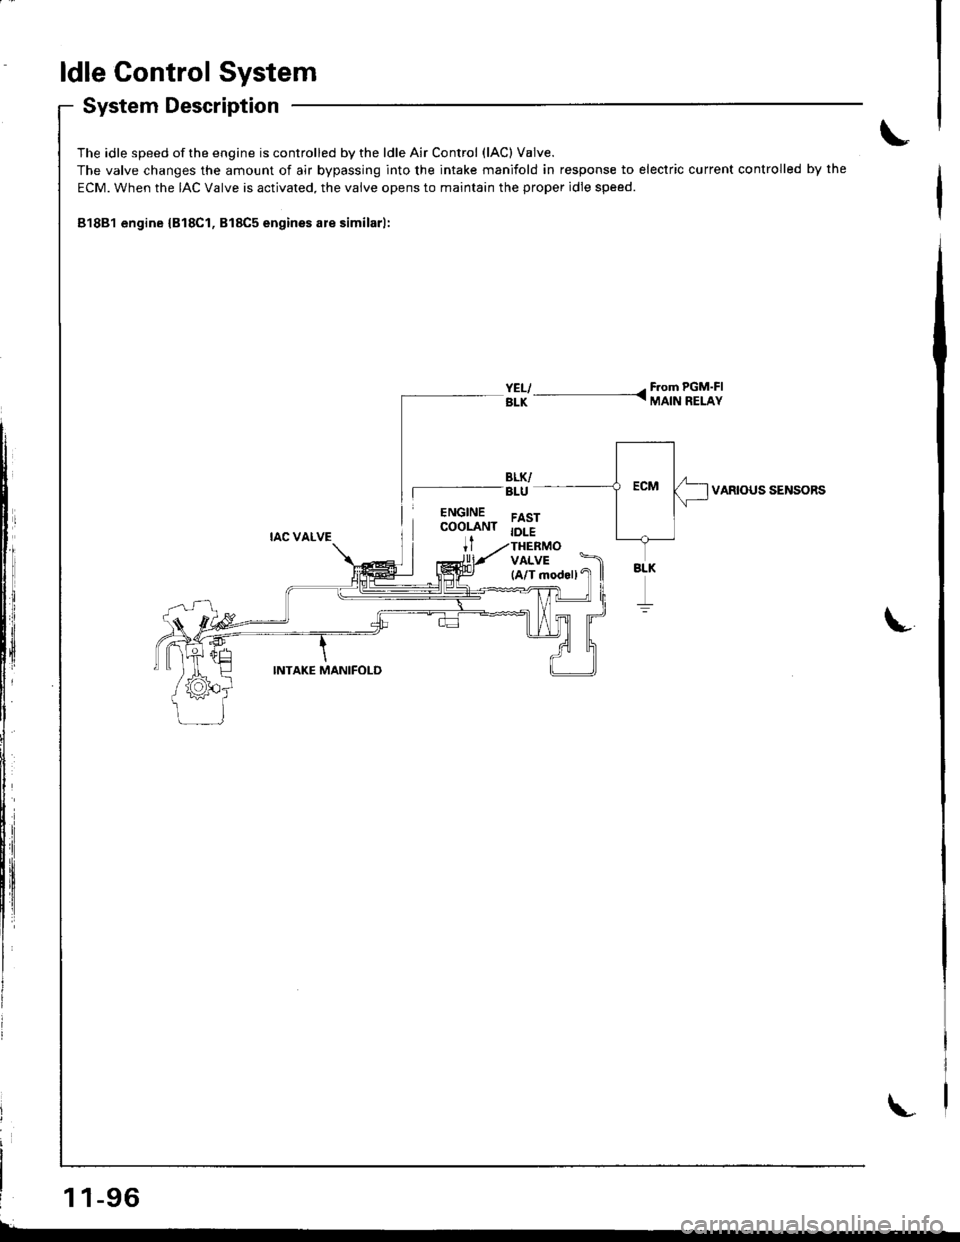 HONDA INTEGRA 1998 4.G User Guide ldle Control System
System Description
The idle speed of the engine is controlled by the ldle Air Control (lAC) V8lve.
The valve changes the amount of air bypassing into the intake manifold in respons